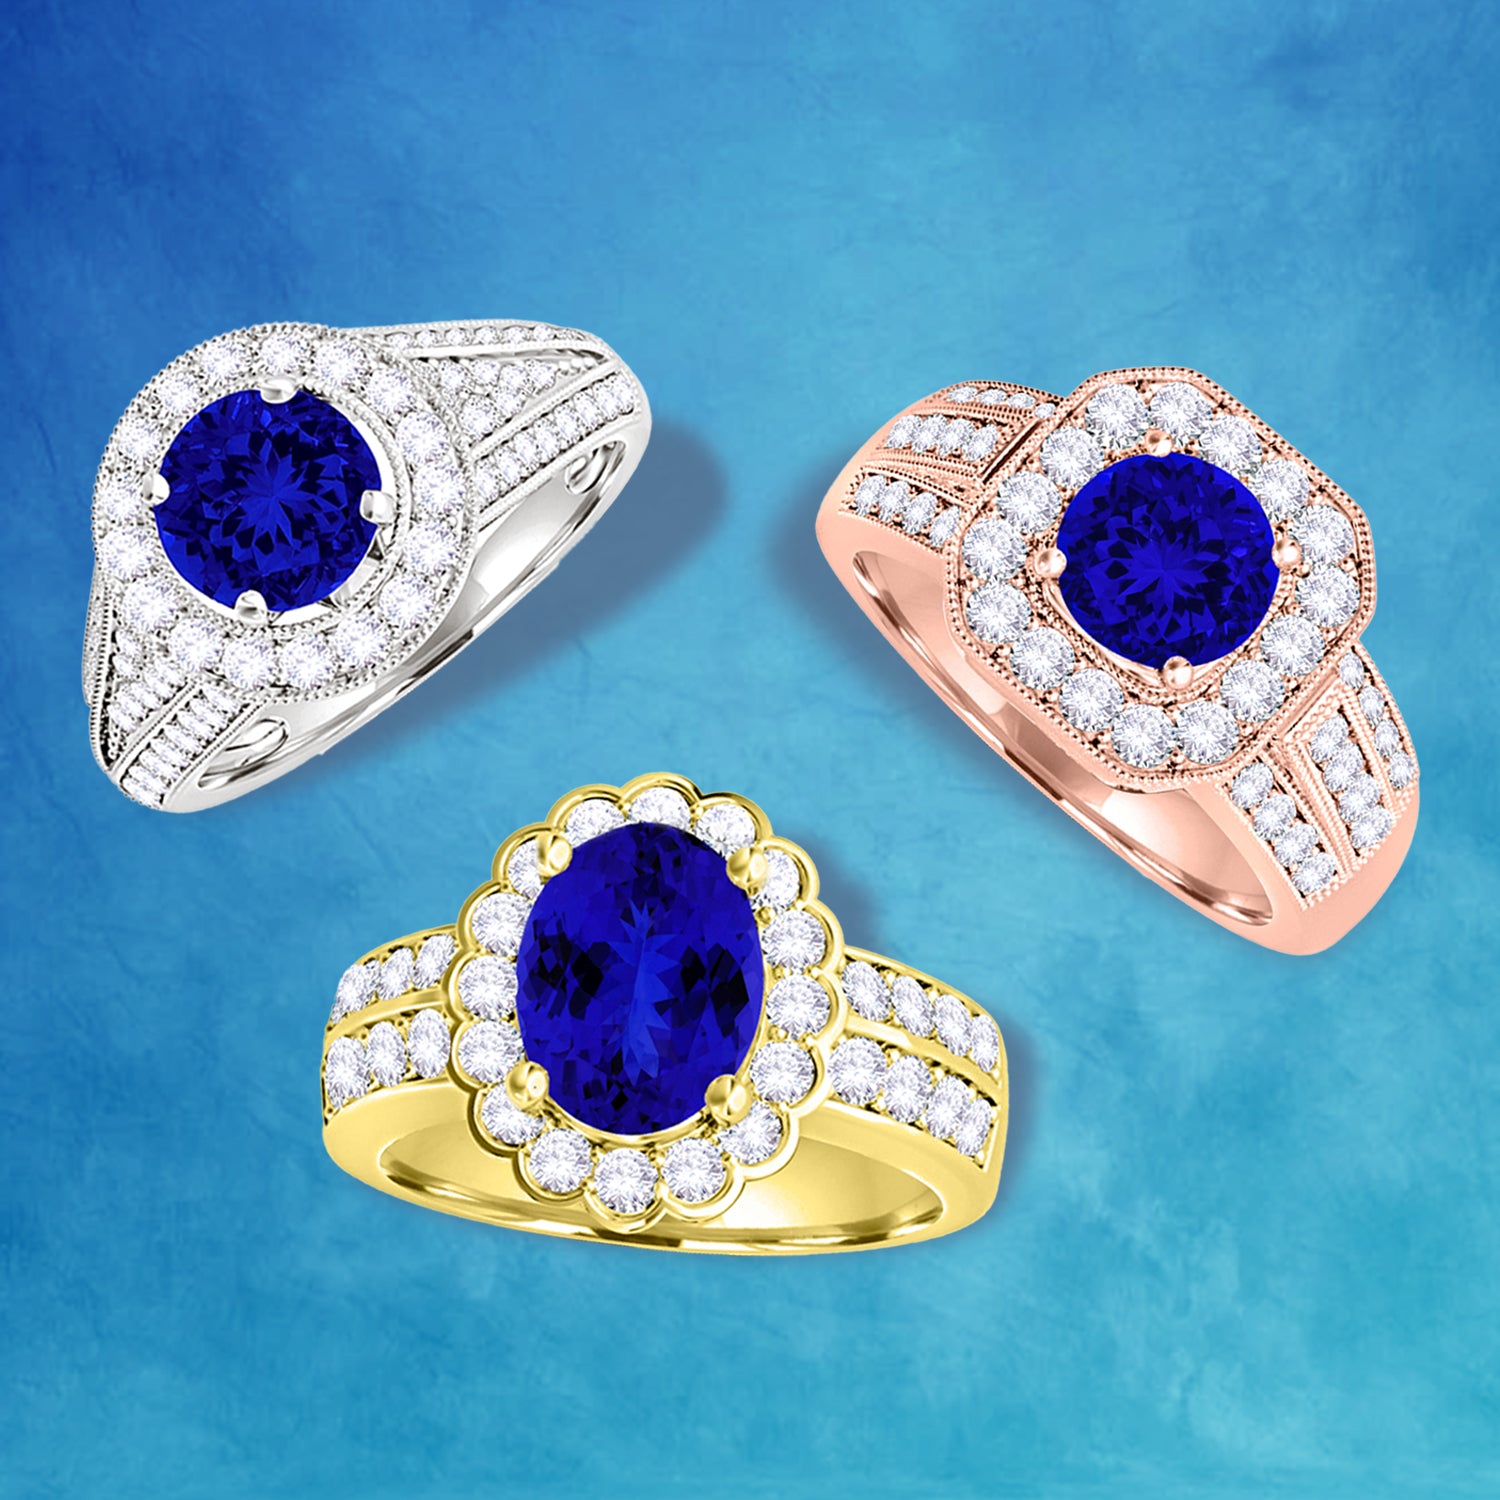 Can't decide between our collection of gorgeous rings? Try a custom tanzanite ring